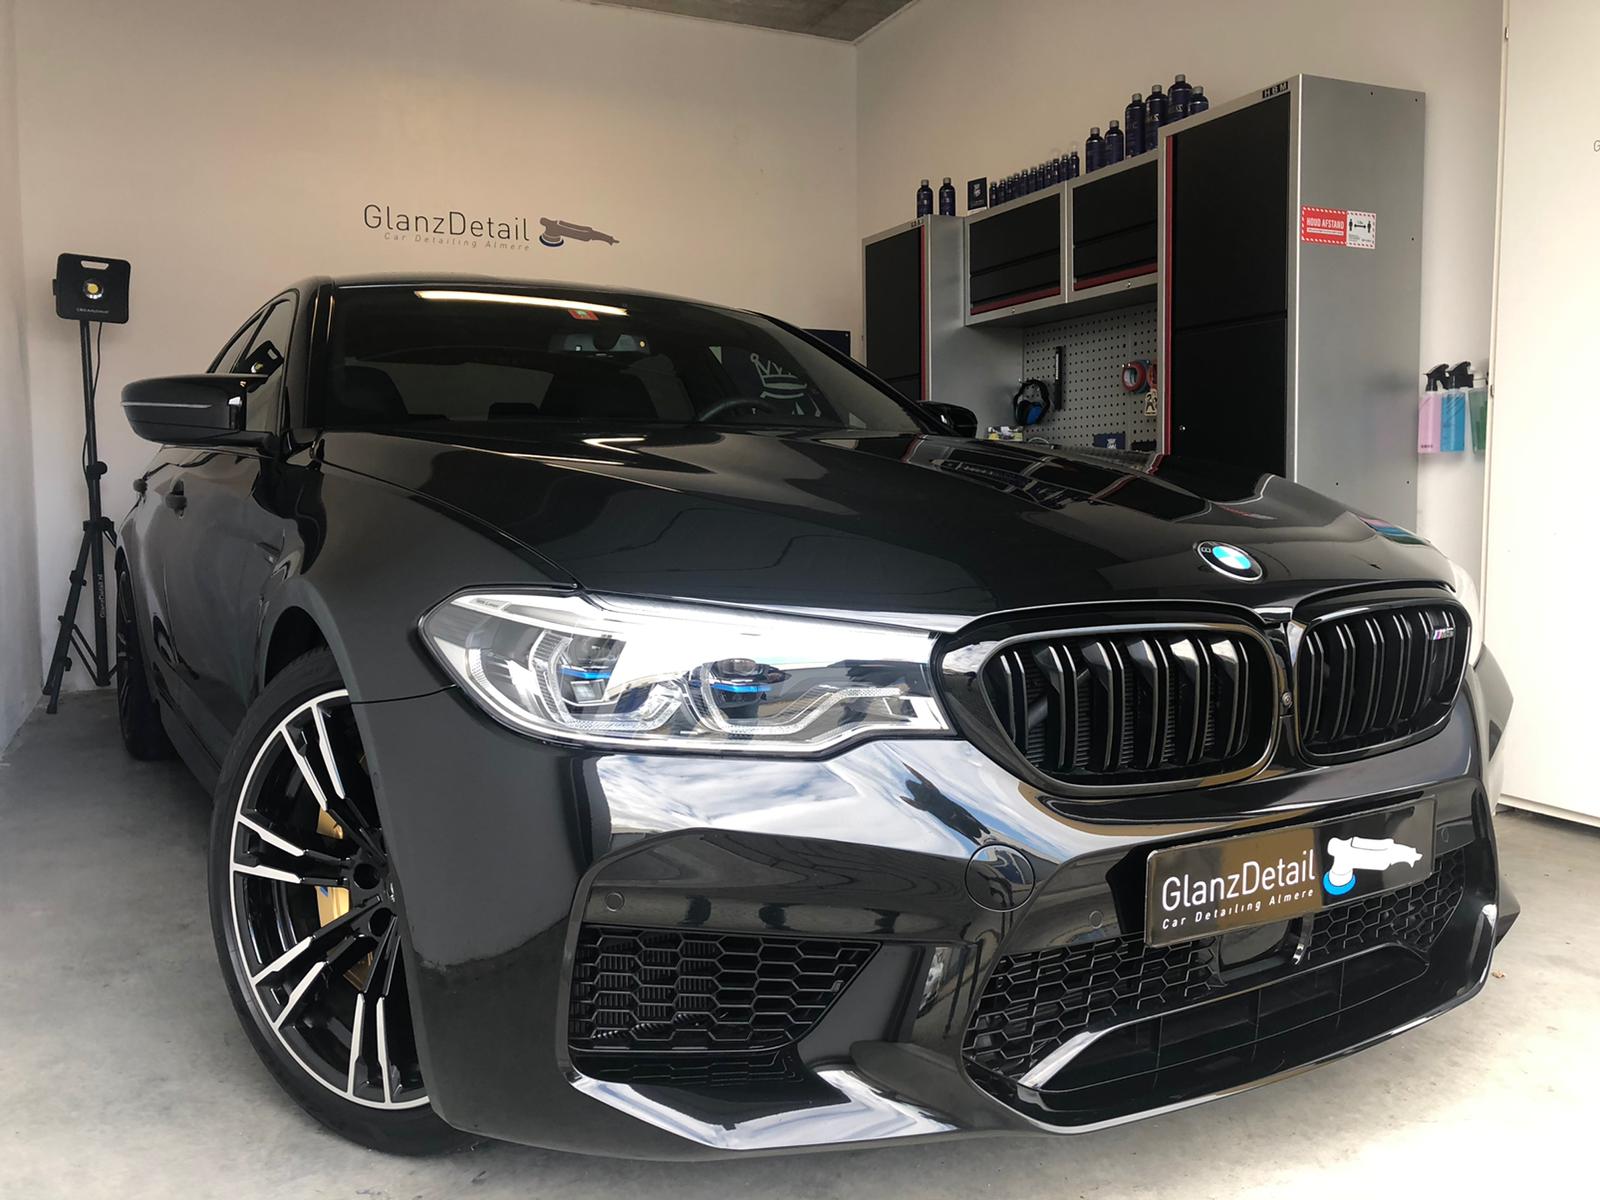 glanzdetail-bmw-m5-competition-glascoating